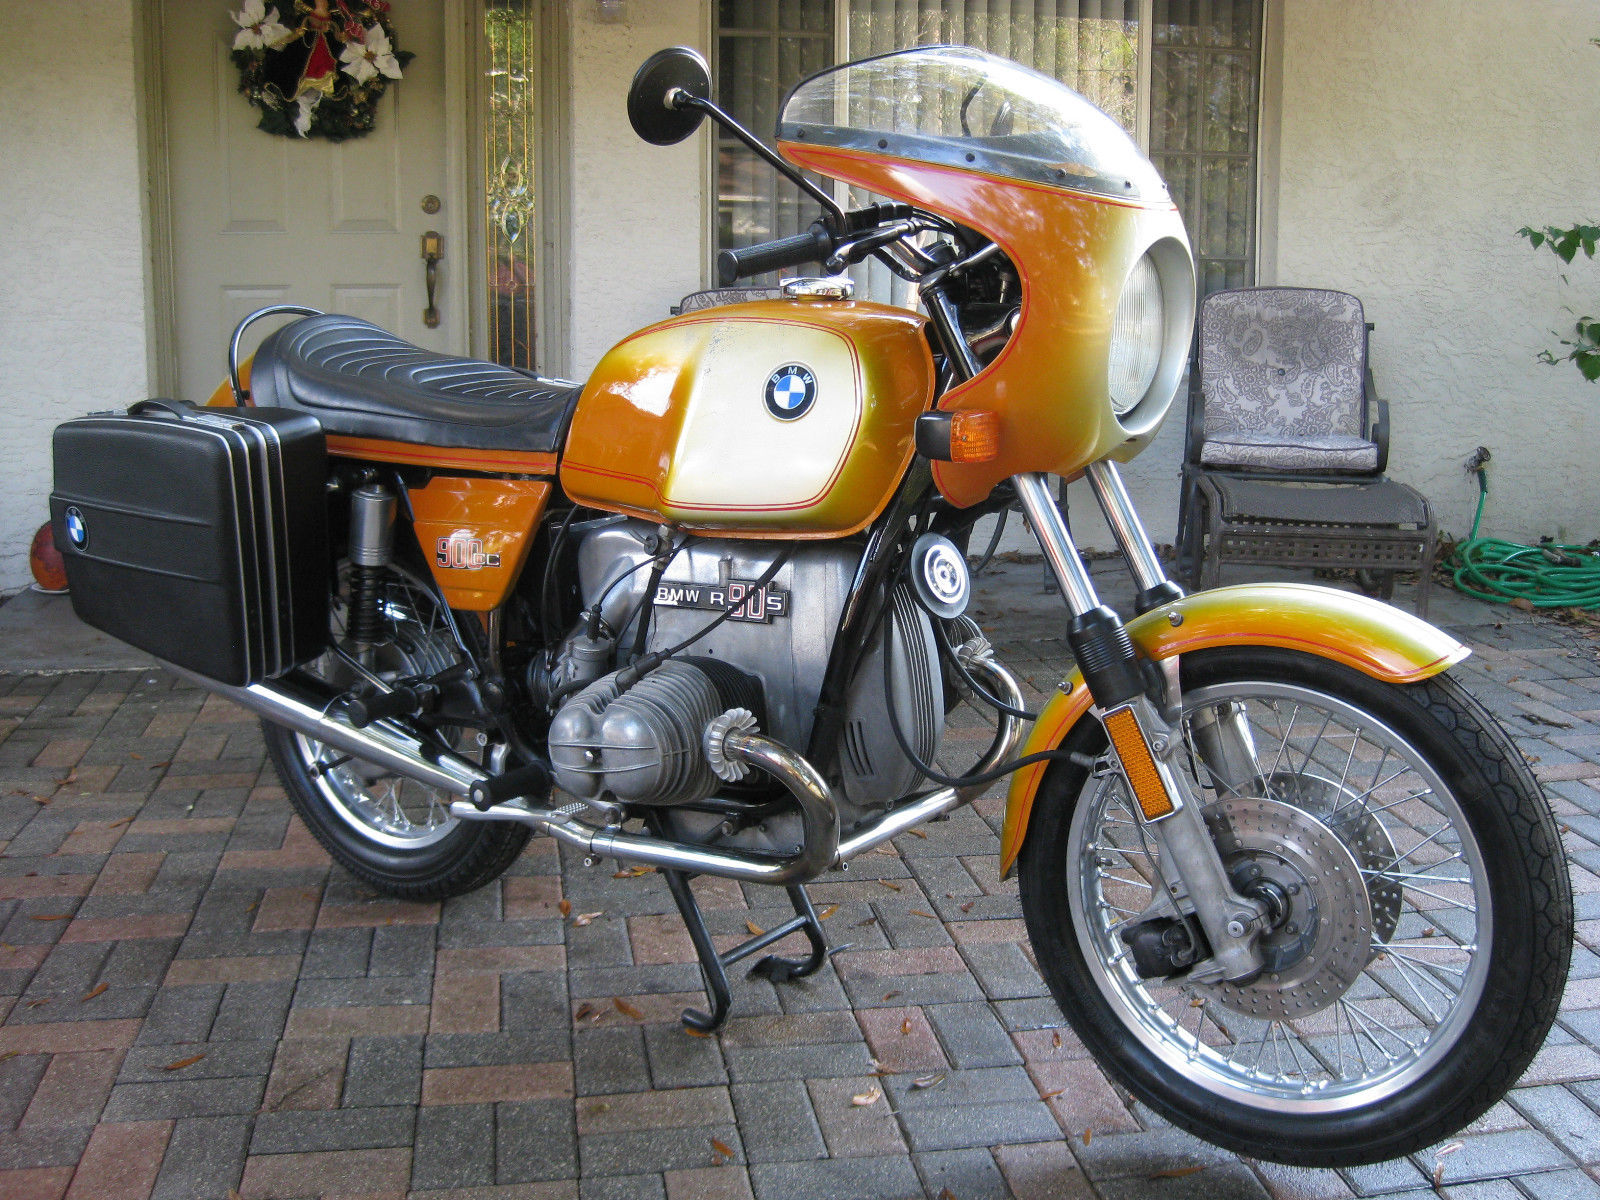 1975 Bmw motorcycle r90s #3